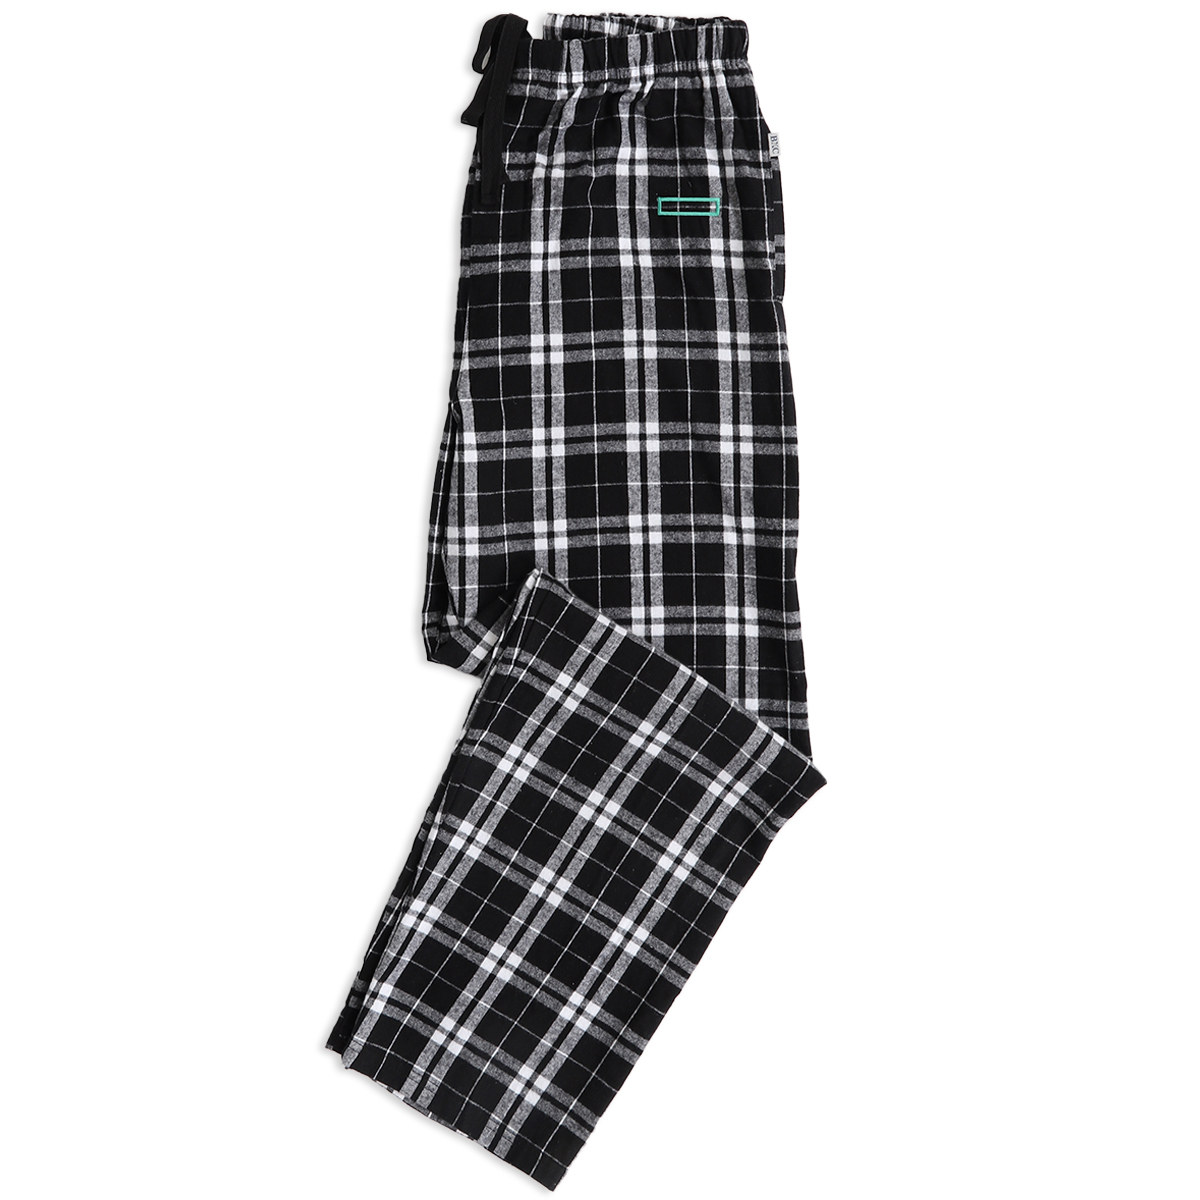 Boxercraft Men's Harley Flannel Pant with Pockets